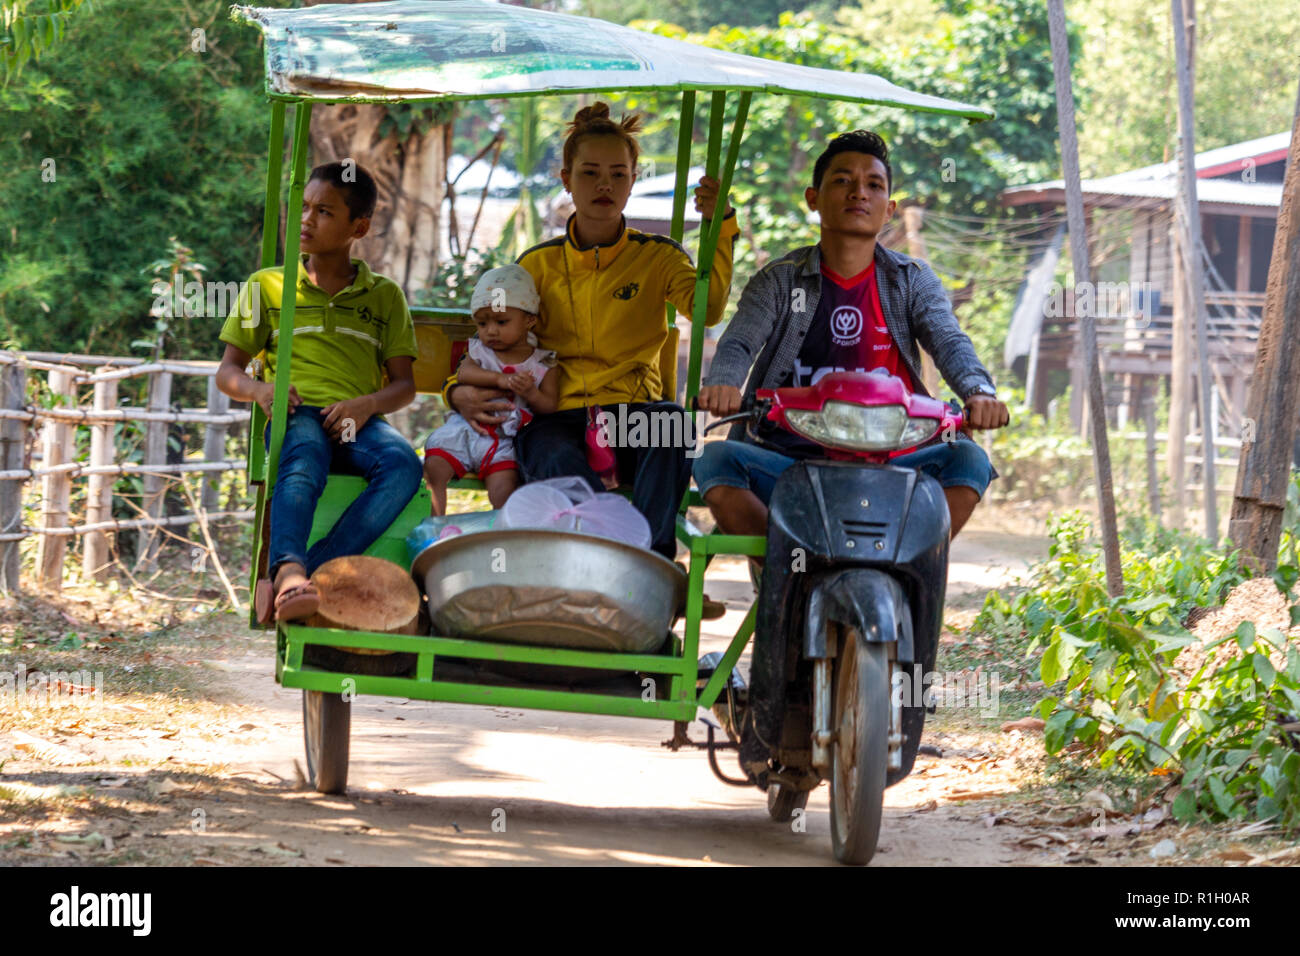 Don Det, Laos - April 22, 2018: Local family getting transported on a sidecar in a small village of southern Laos Stock Photo